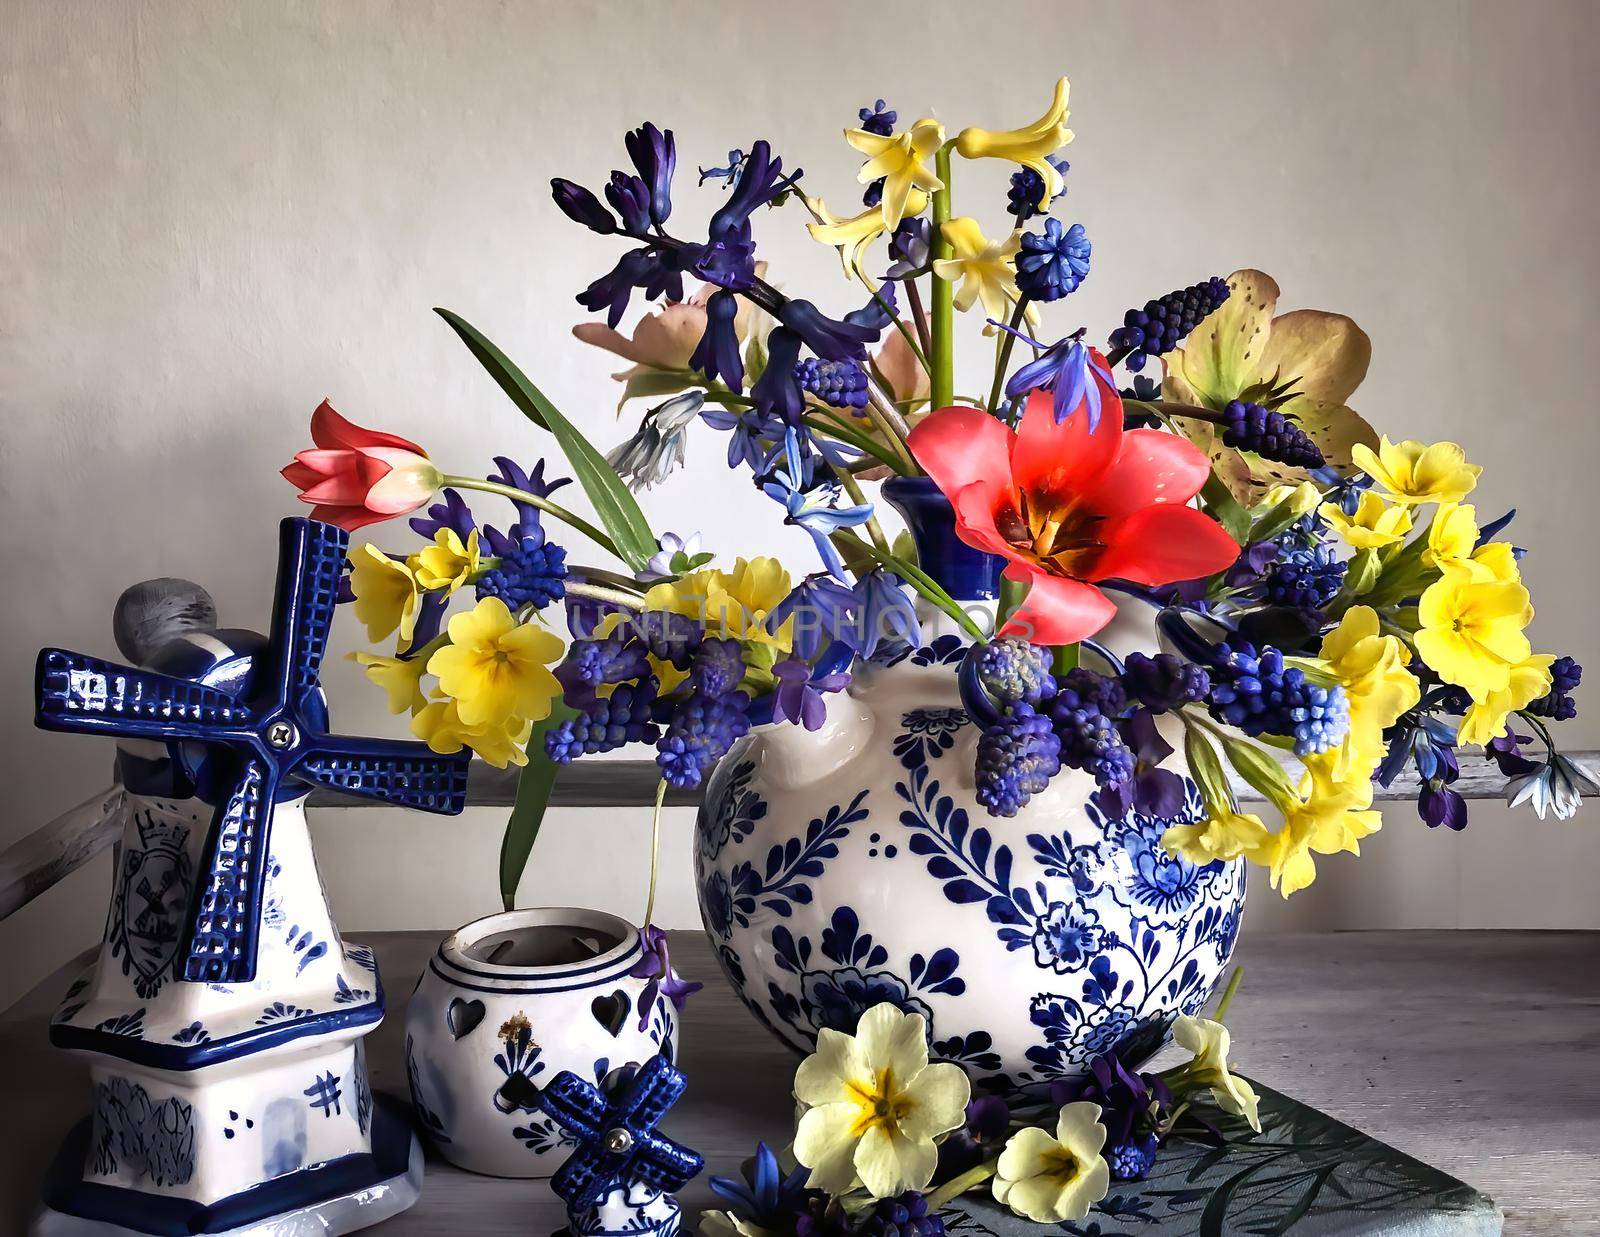 Home decor and the art of arranging bouquets. Bouquet of colorful garden flowers. The composition includes porcelain home decor, muscari, primrose, tulips and hyacinths